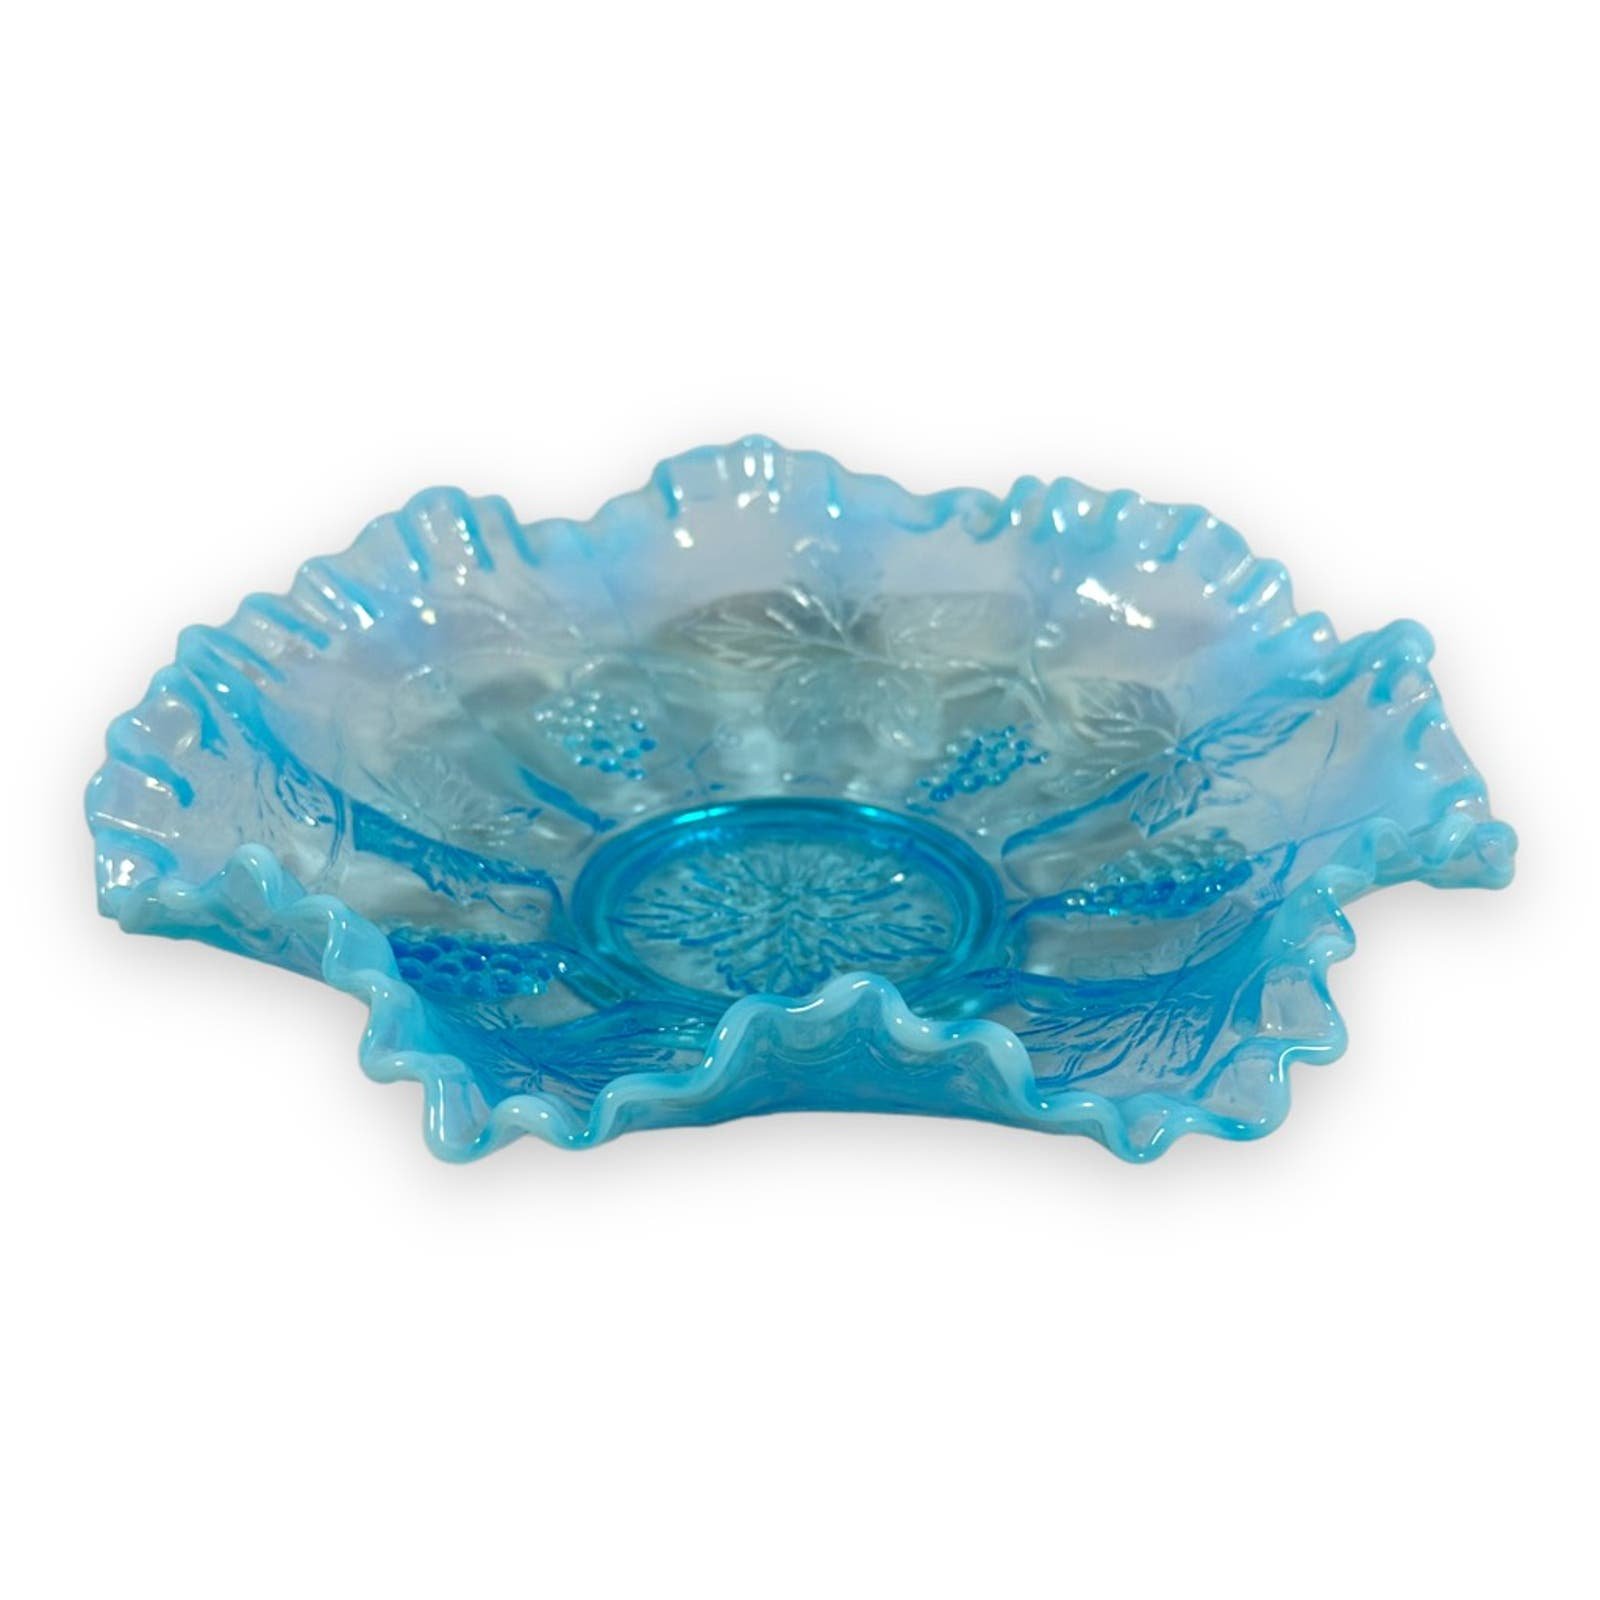 Vintage Fenton Candy Dish Grape Cable Opalescent Footed Blue Ruffled Edge USA 9